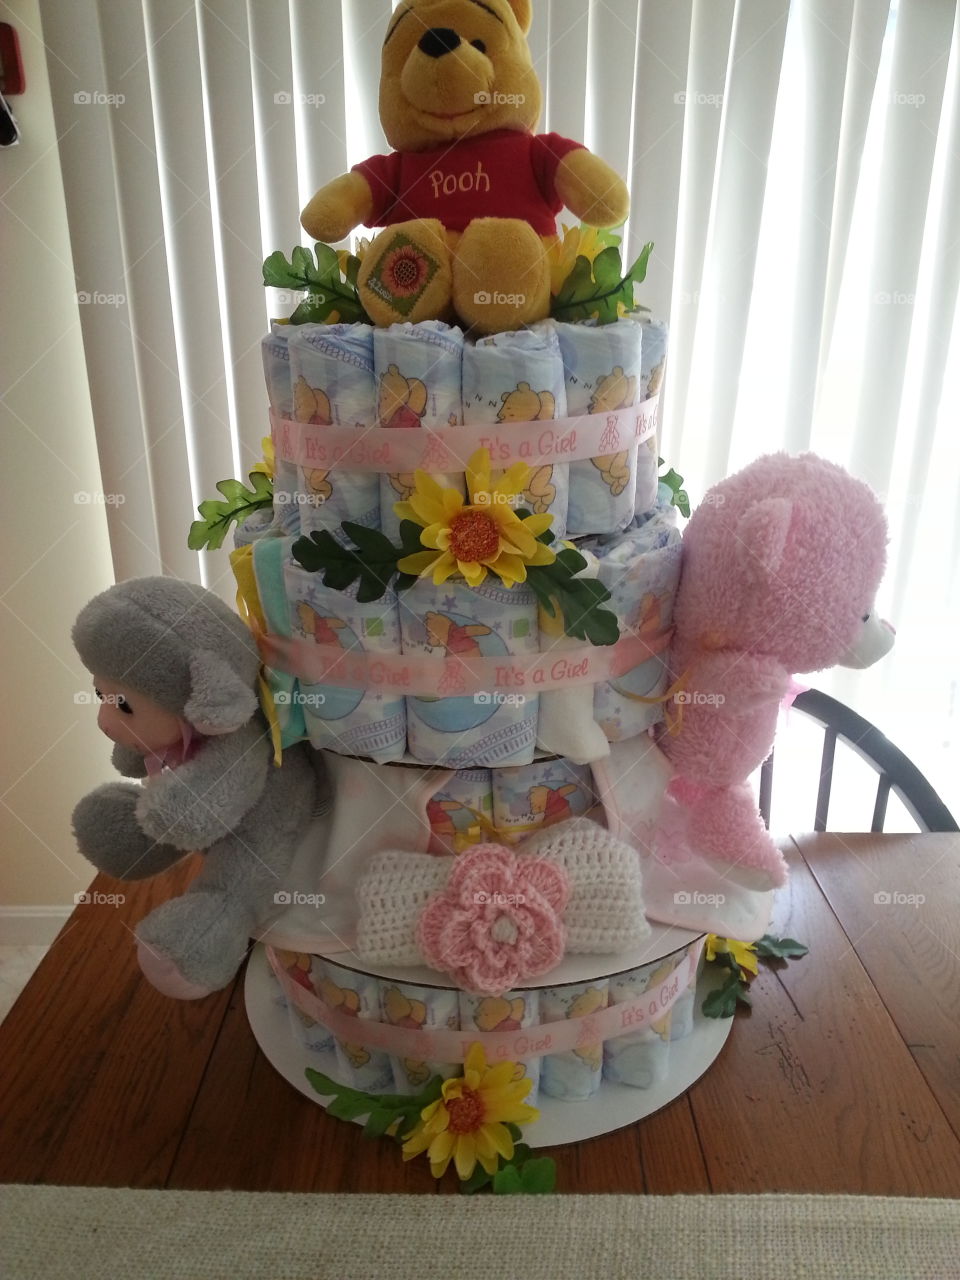 Disney diaper cake. made this for a baby shower